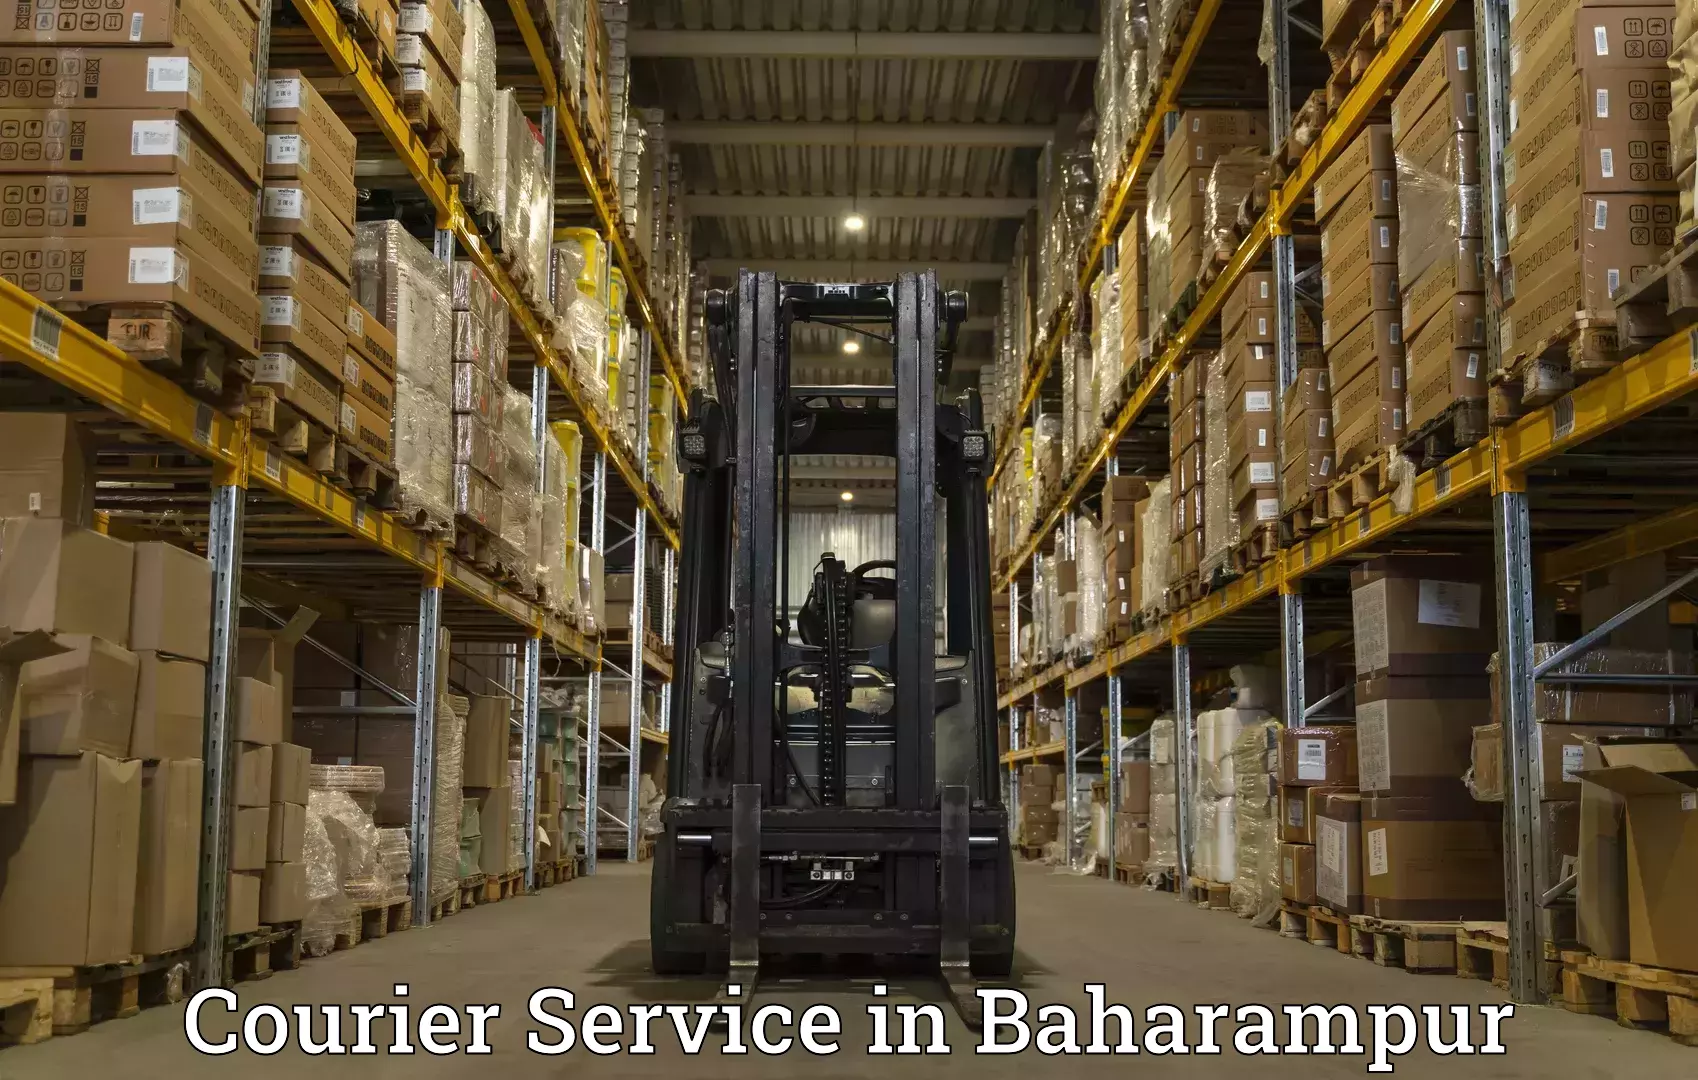 Seamless shipping experience in Baharampur